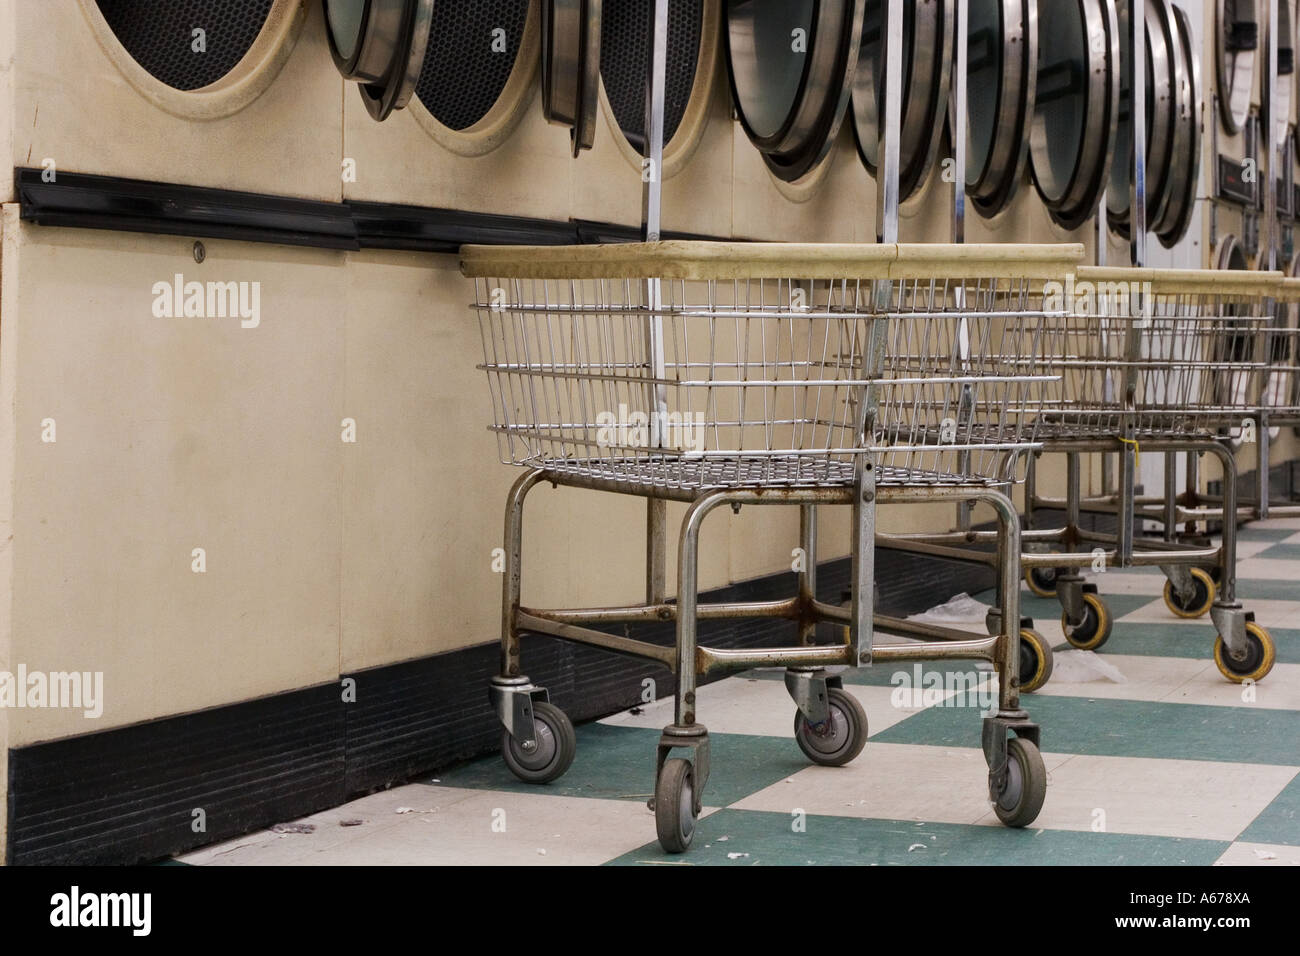 Dryers and clothes carts at laundromat Stock Photo - Alamy